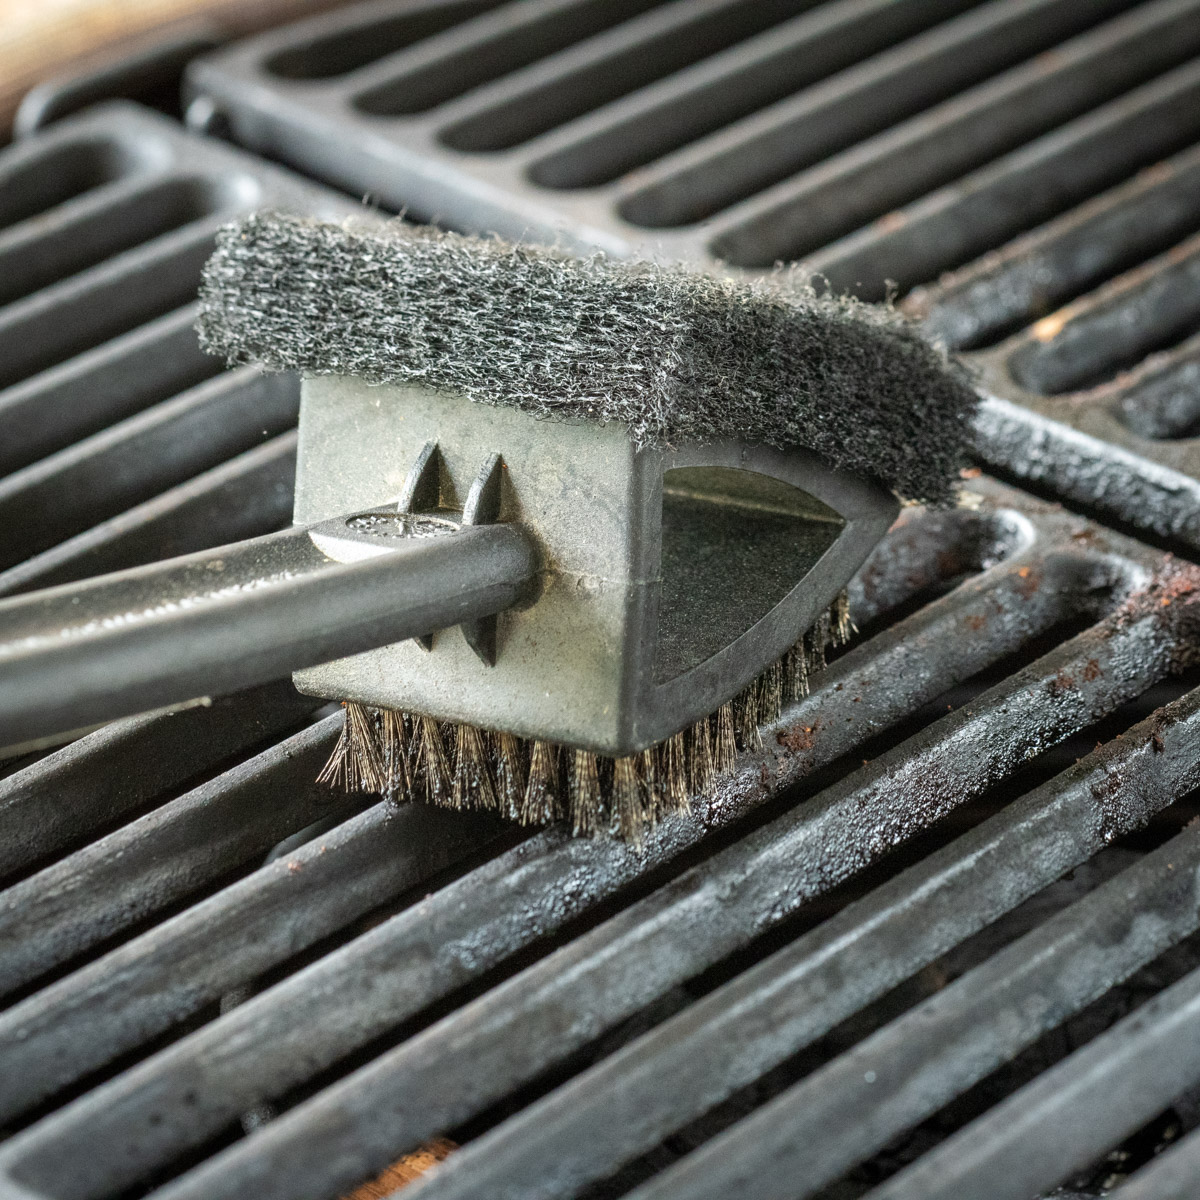 Cleaning a BBQ grill.